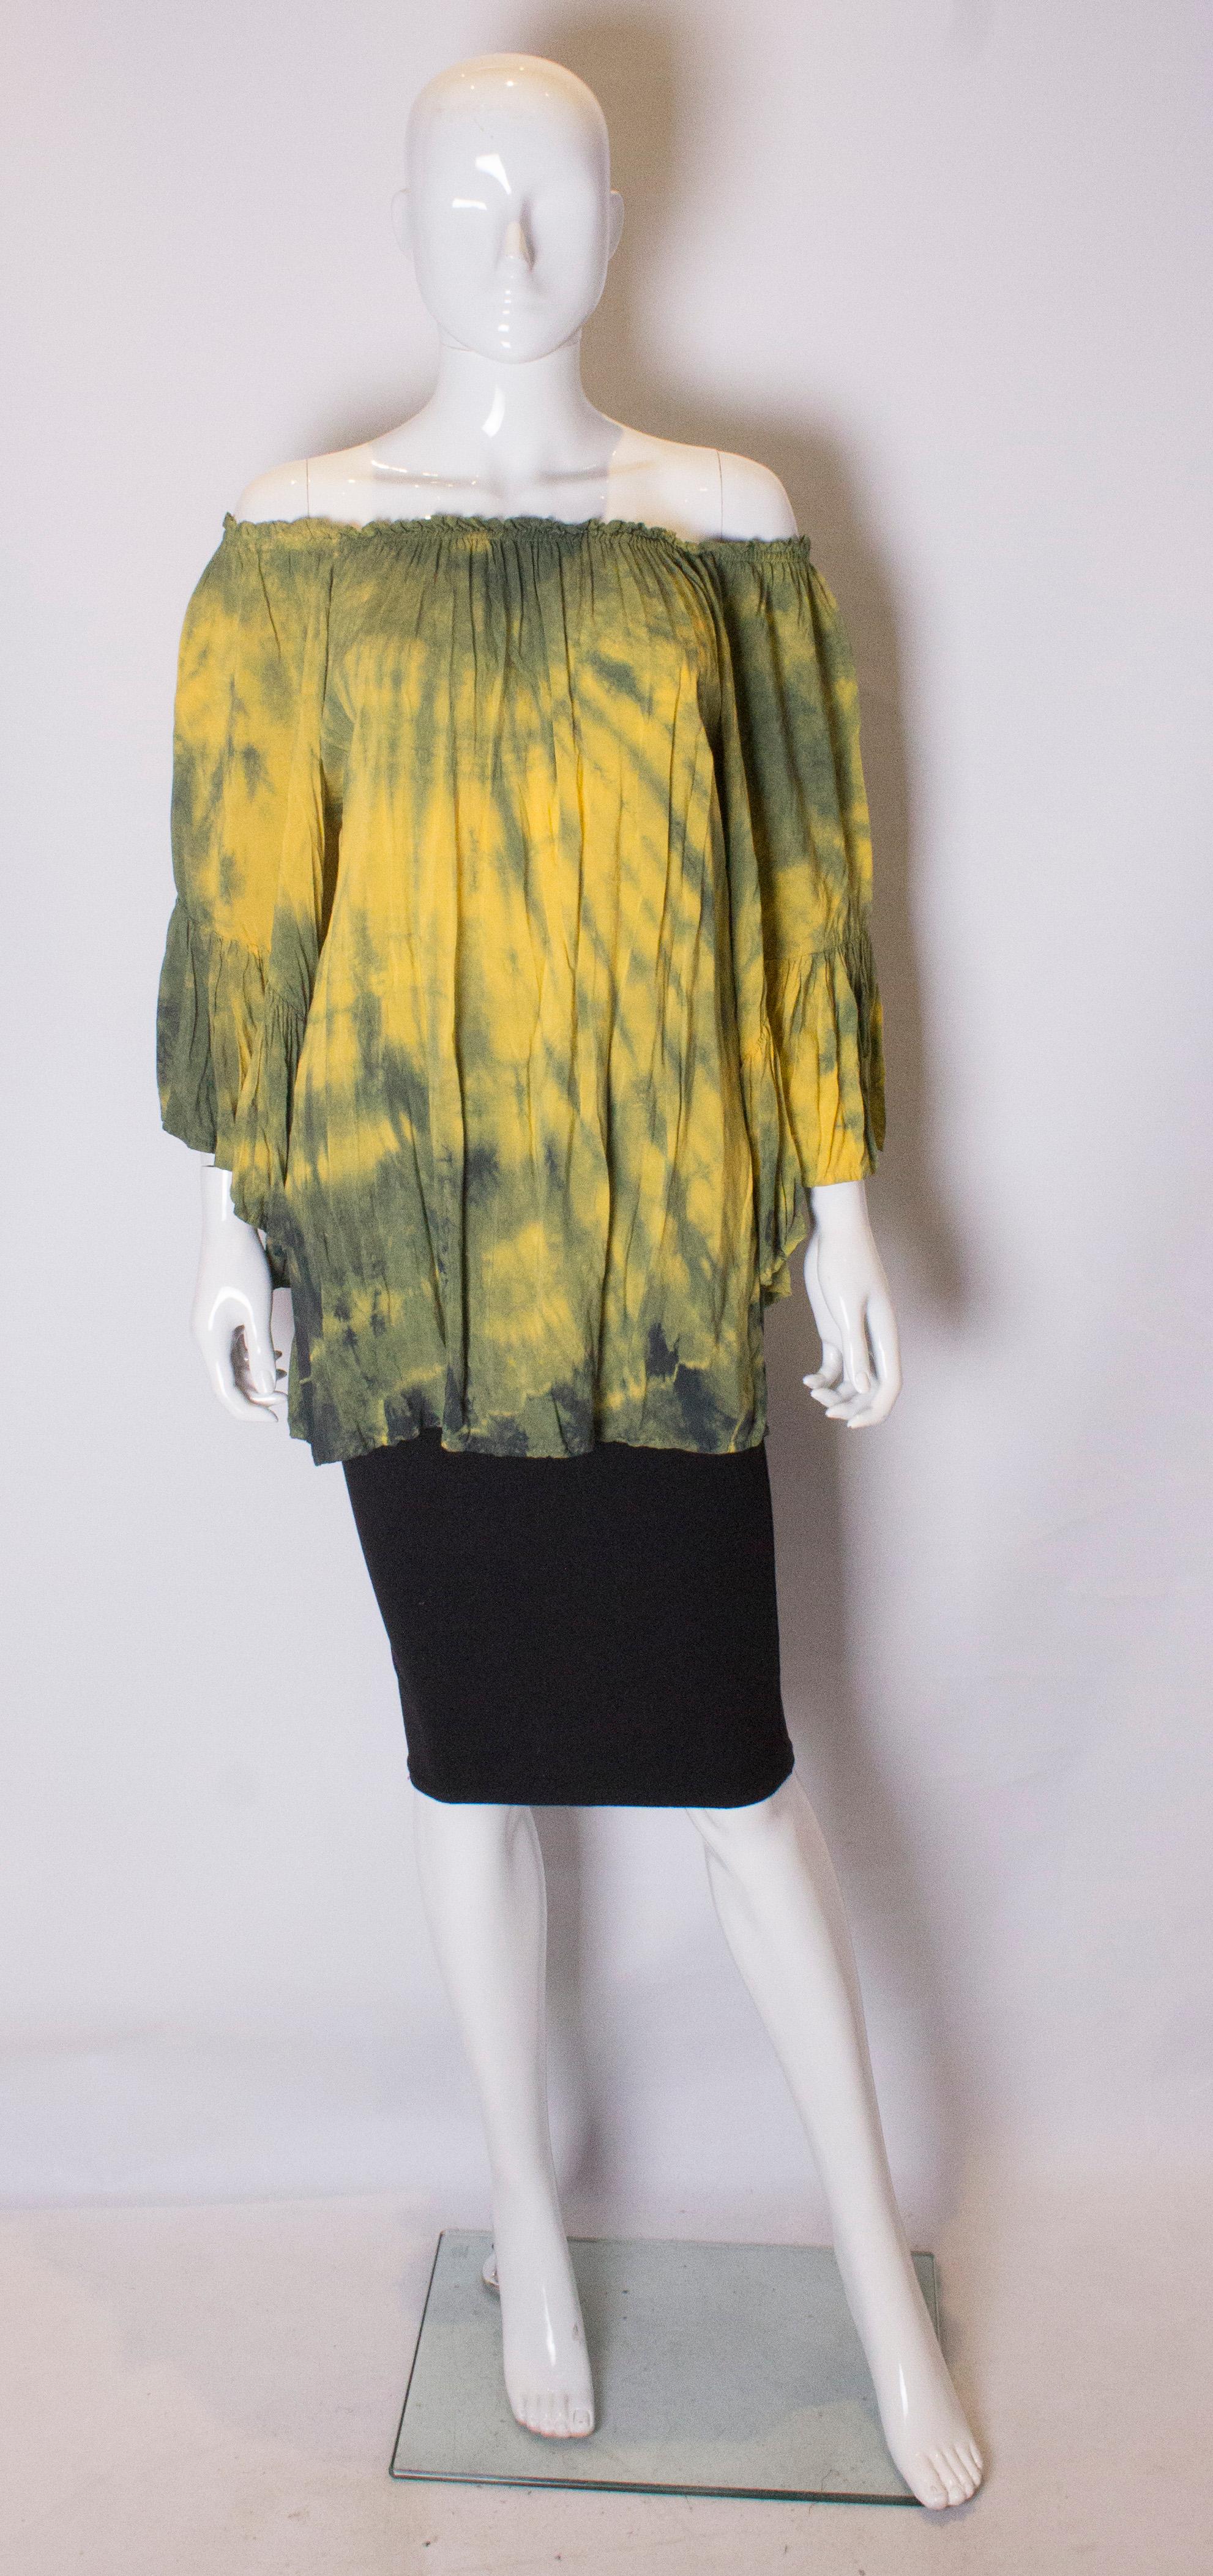 A fun vintage top , in a yellow and green mix.  The top has an elasticated neckline and so can be worn on or off the shoulder,and has elbow length sleaves.